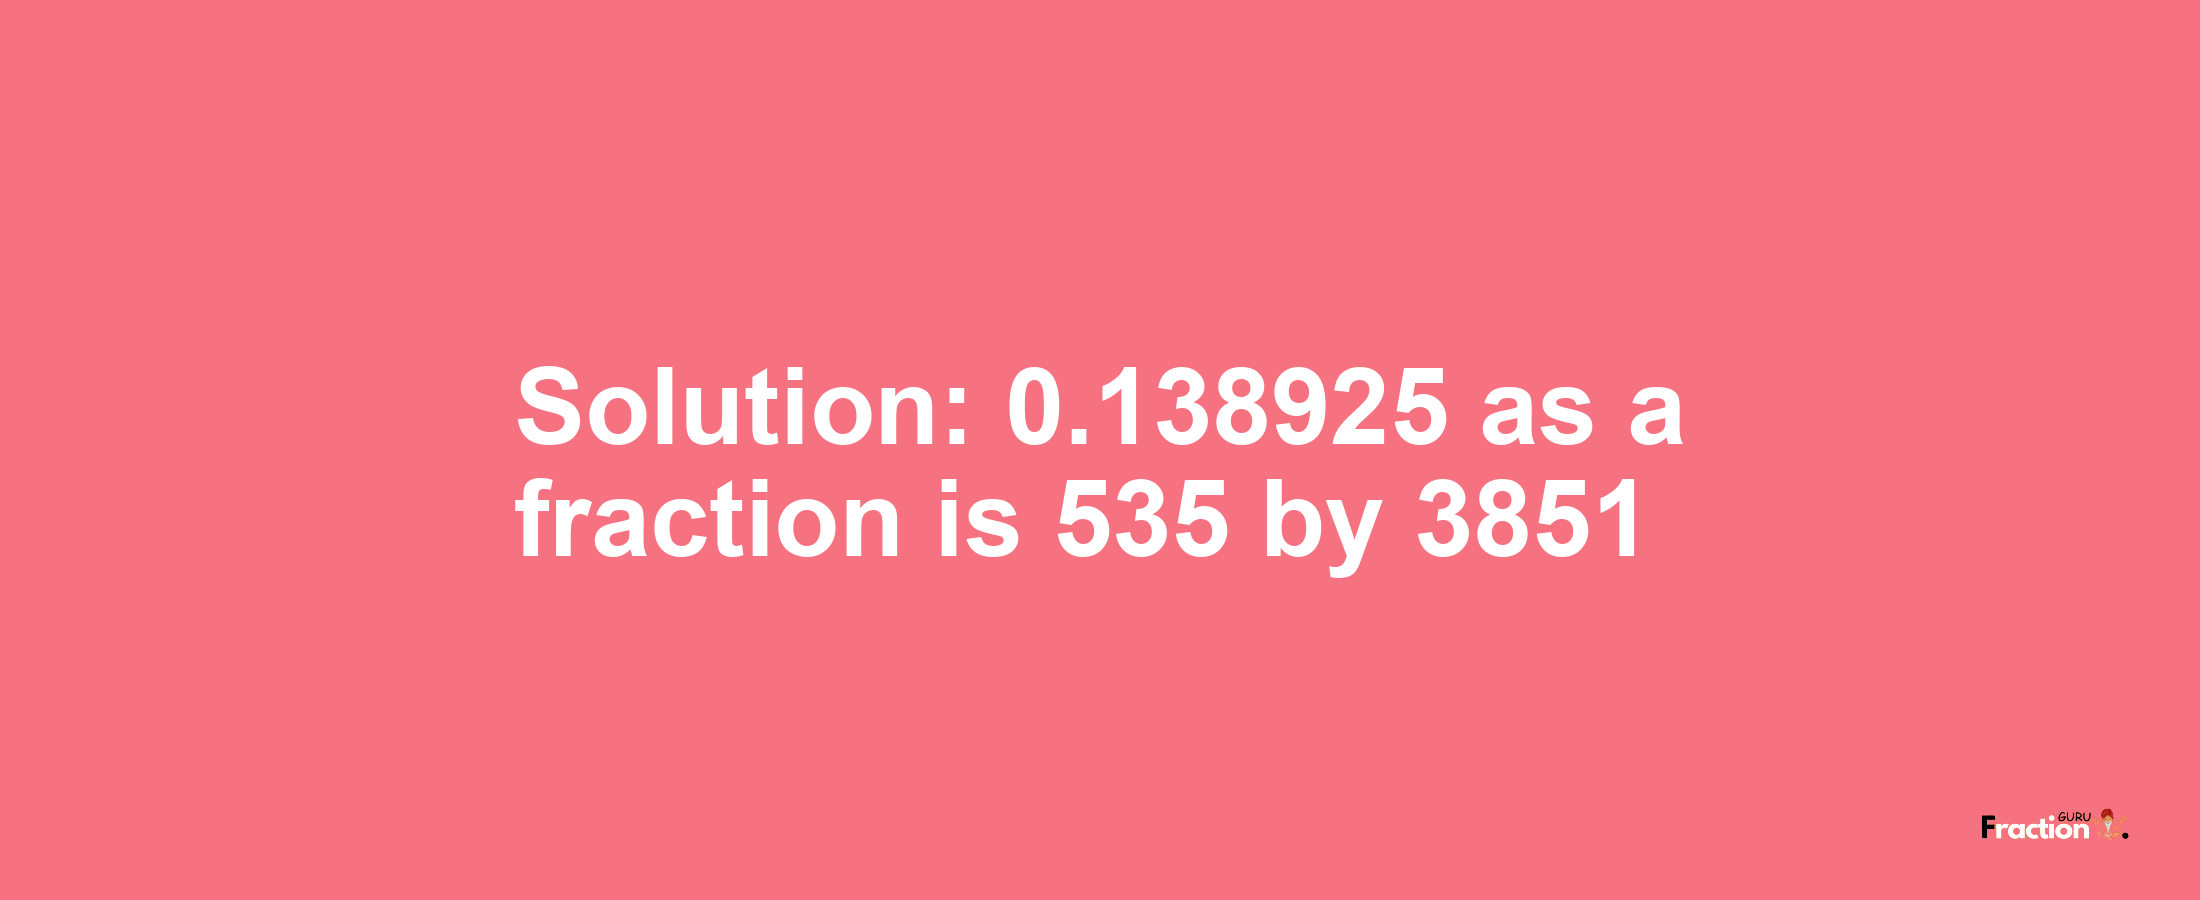 Solution:0.138925 as a fraction is 535/3851